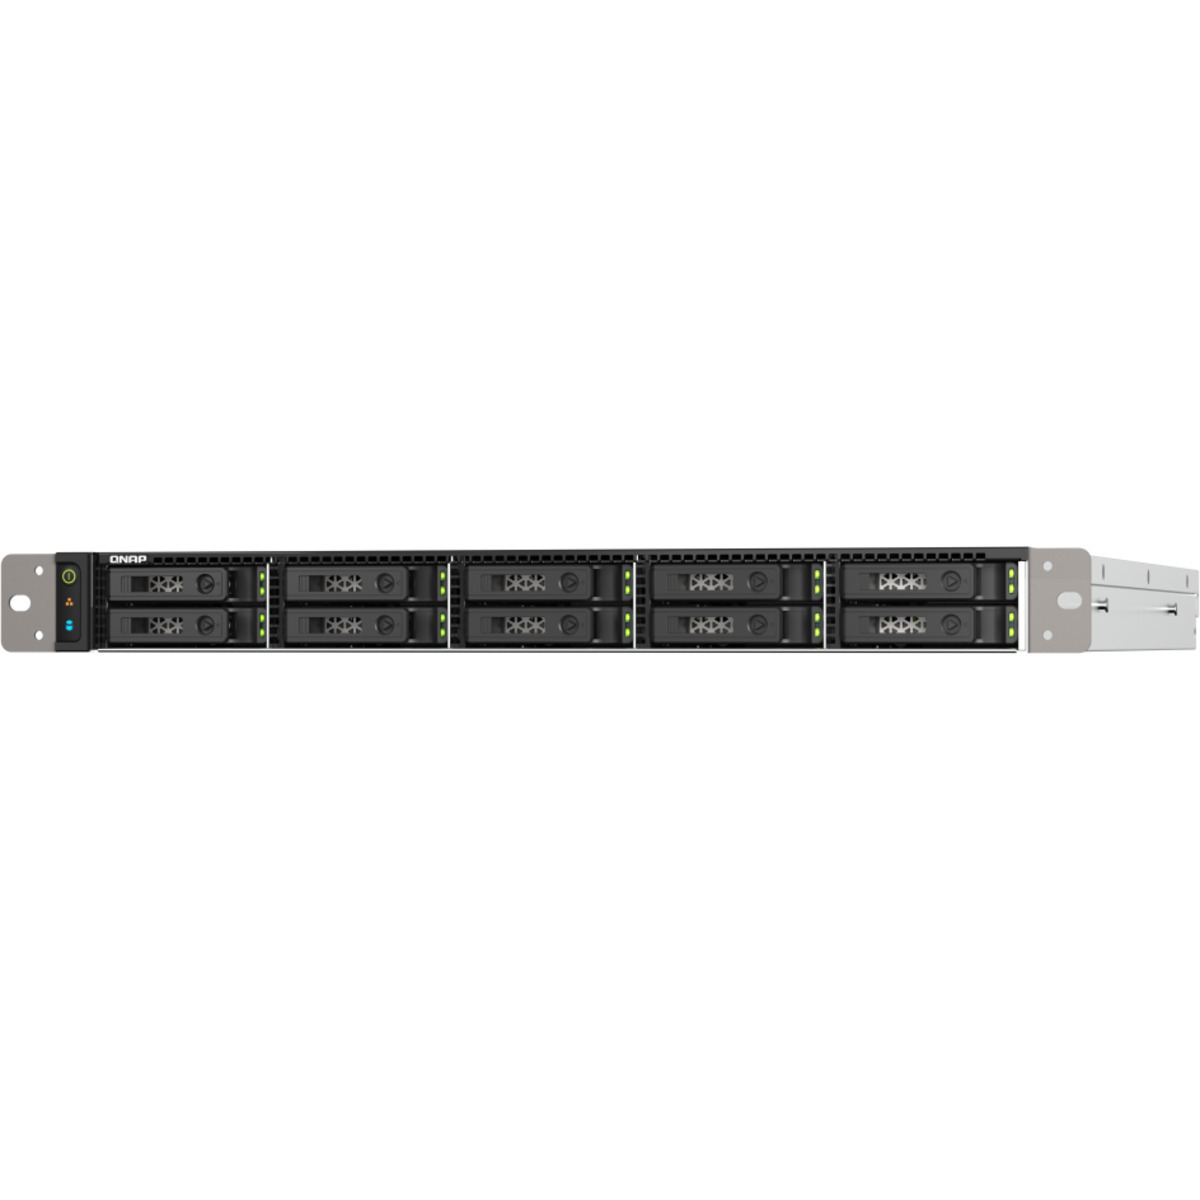 QNAP TS-h1090FU-7302P 7tb 10-Bay RackMount Large Business / Enterprise NAS - Network Attached Storage Device 7x1tb Sandisk Plus Series SDSSDA3N-1T00  3200/2500MB/s M.2 2280 NVMe SSD CONSUMER Class Drives Installed - Burn-In Tested TS-h1090FU-7302P